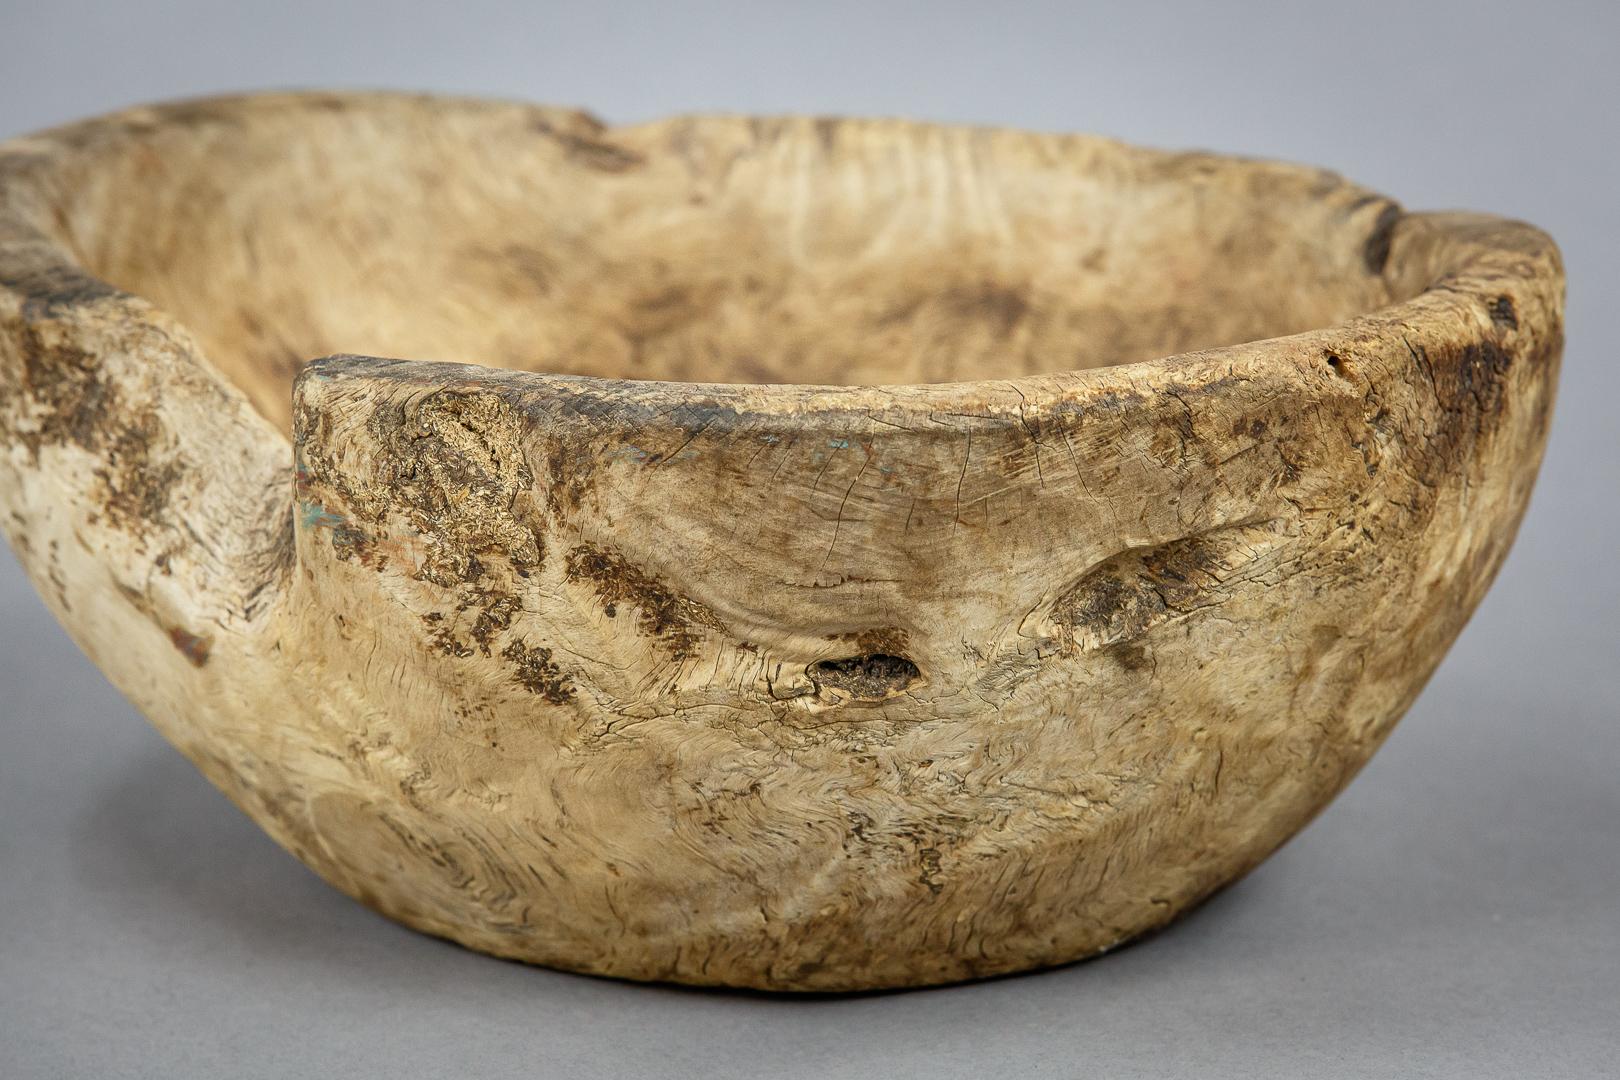 Extraordinary burl root or knot bowl, dry textured surface. Wonderful wear and patina, Northern Europe circa 1800.
Dimensions: 31cm x 13cm x 25cm.